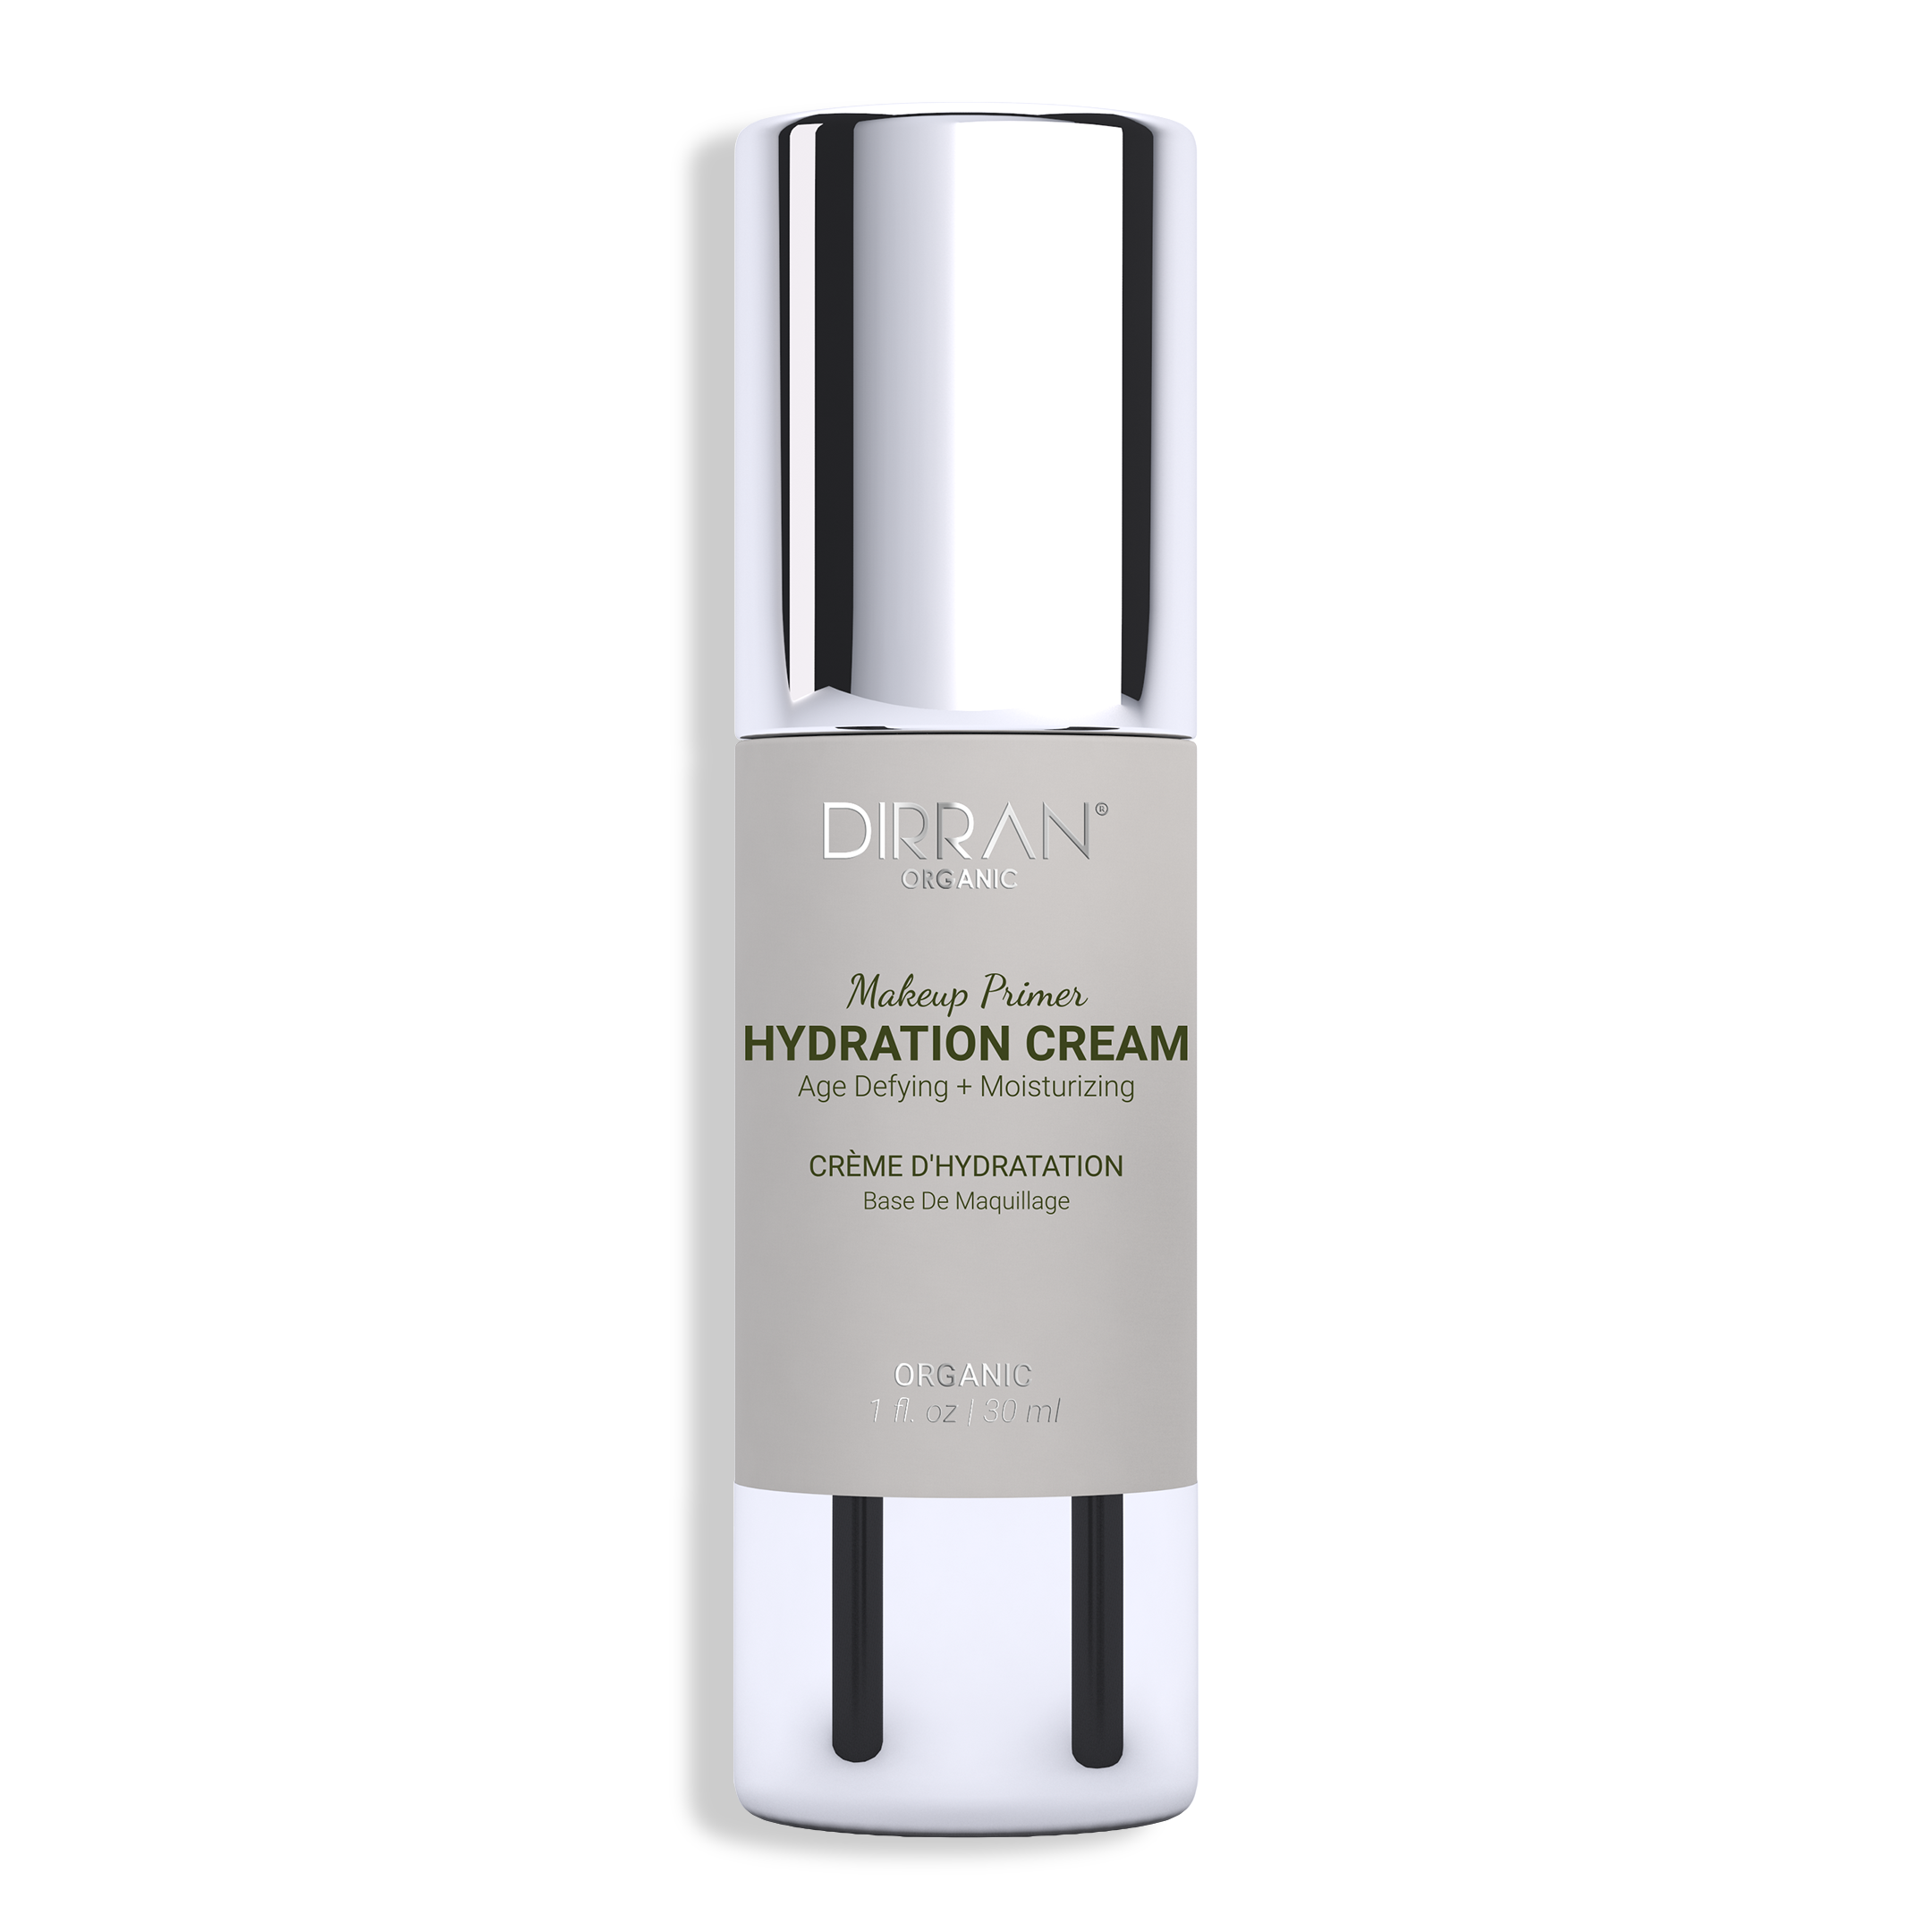 HYDRATION CREAM AND MAKEUP PRIMER Moisturizing and Age Defying